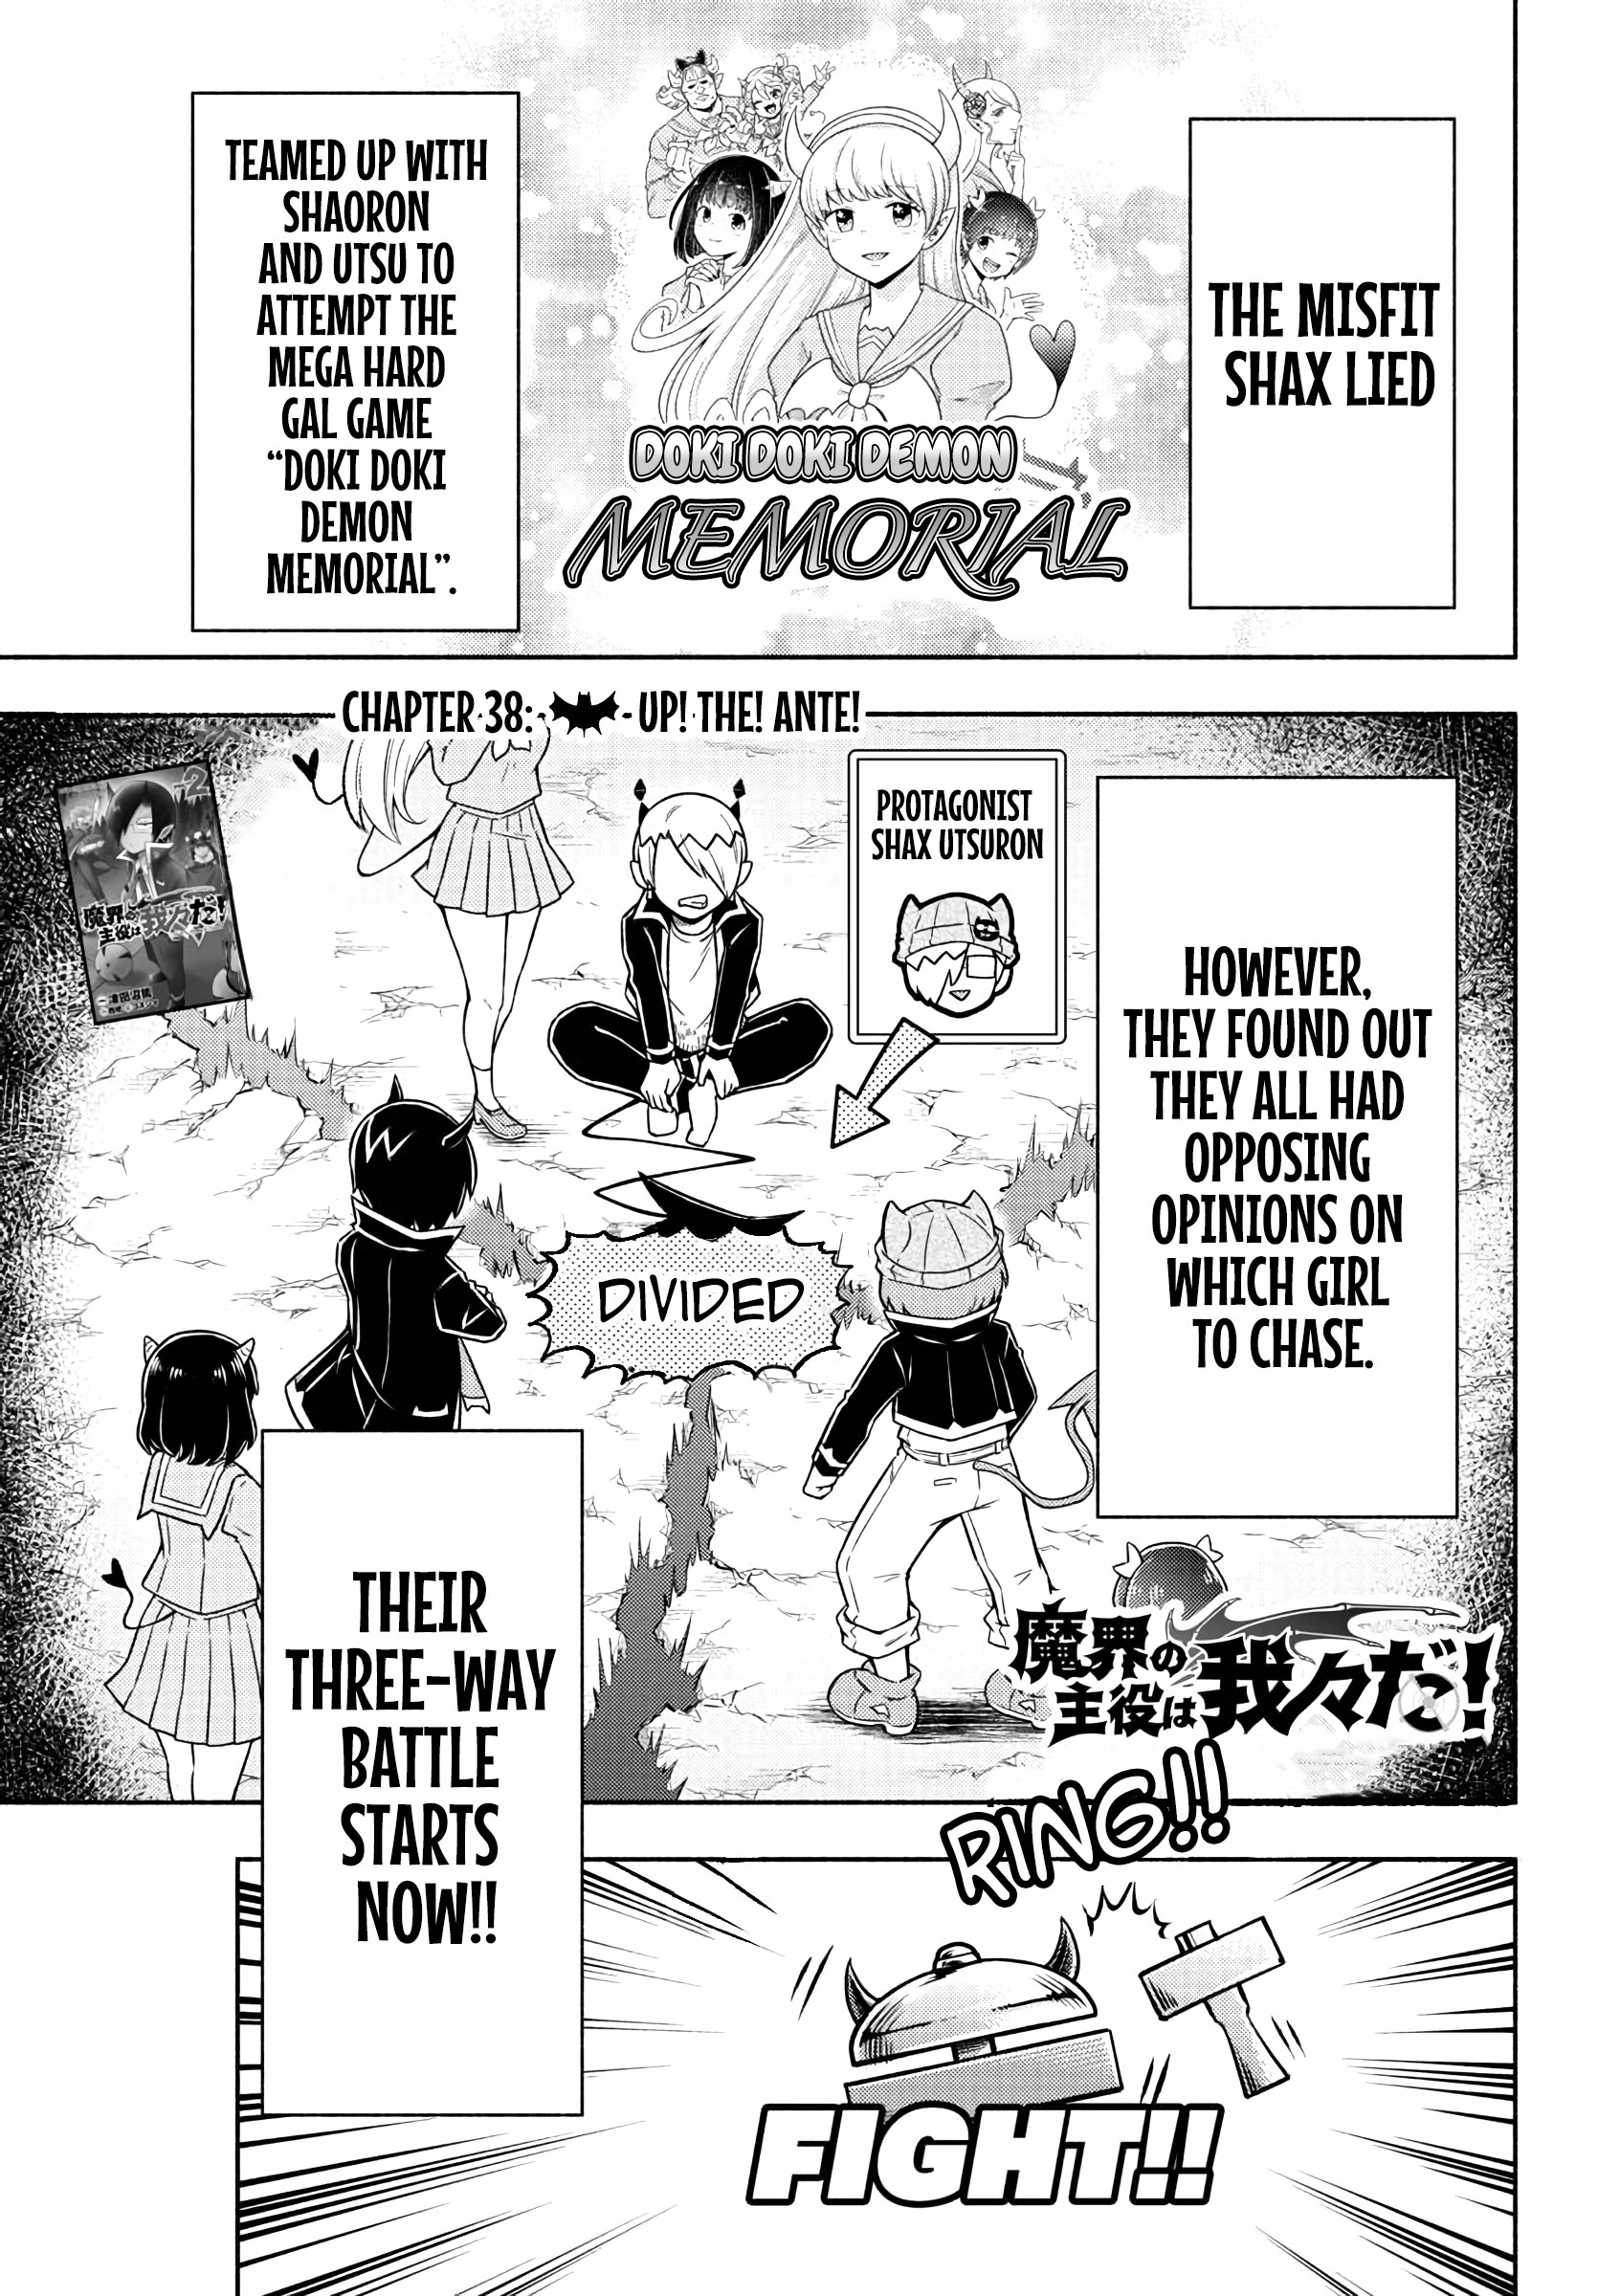 We Are The Main Characters Of The Demon World! Vol.4 Chapter 38: Up! The! Ante! - Picture 1